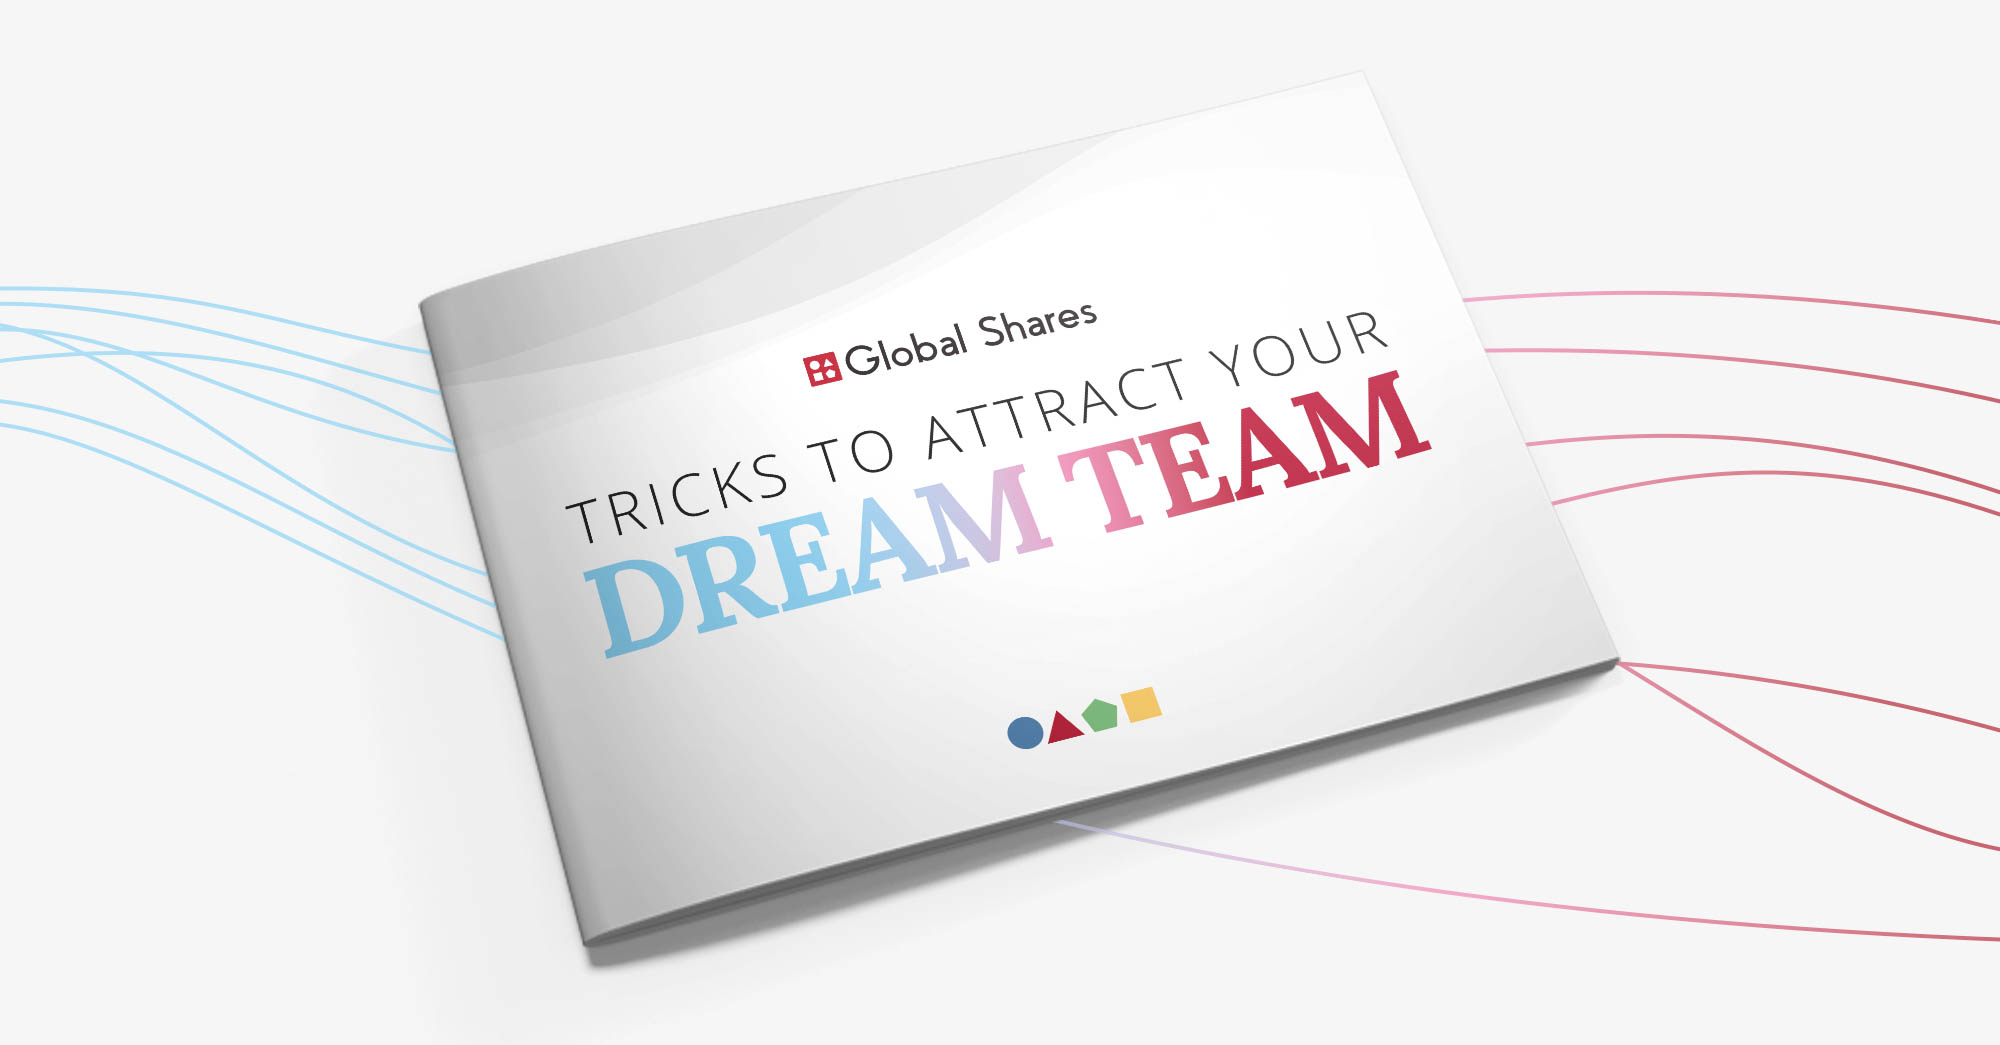 Top Talent Acquisition Tricks to Attract Your Dream Team